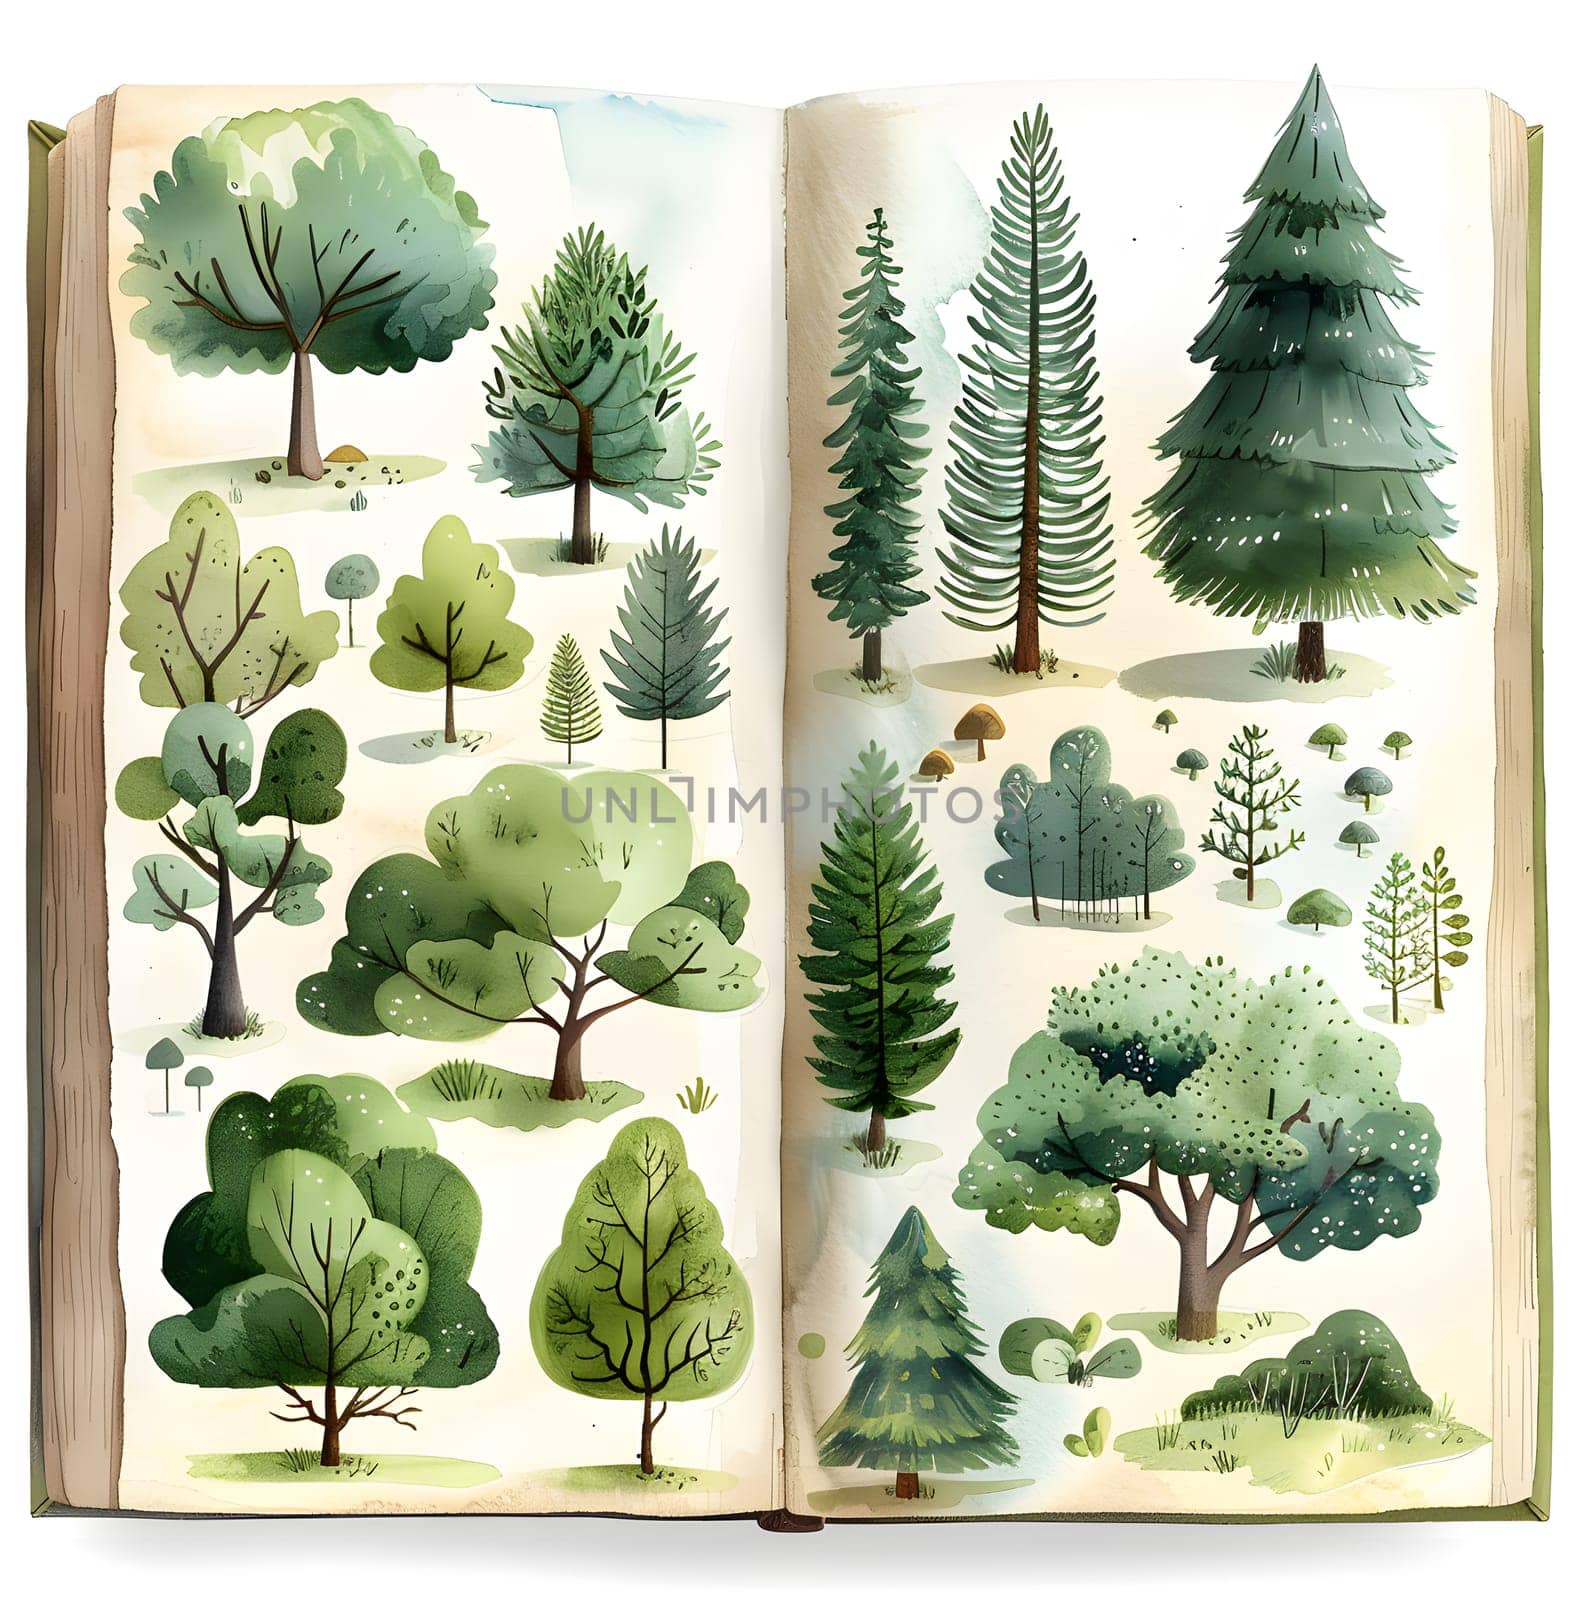 The open book displays a page filled with a lush green landscape featuring a diverse plant community of trees, creating a vibrant terrestrial plant biome